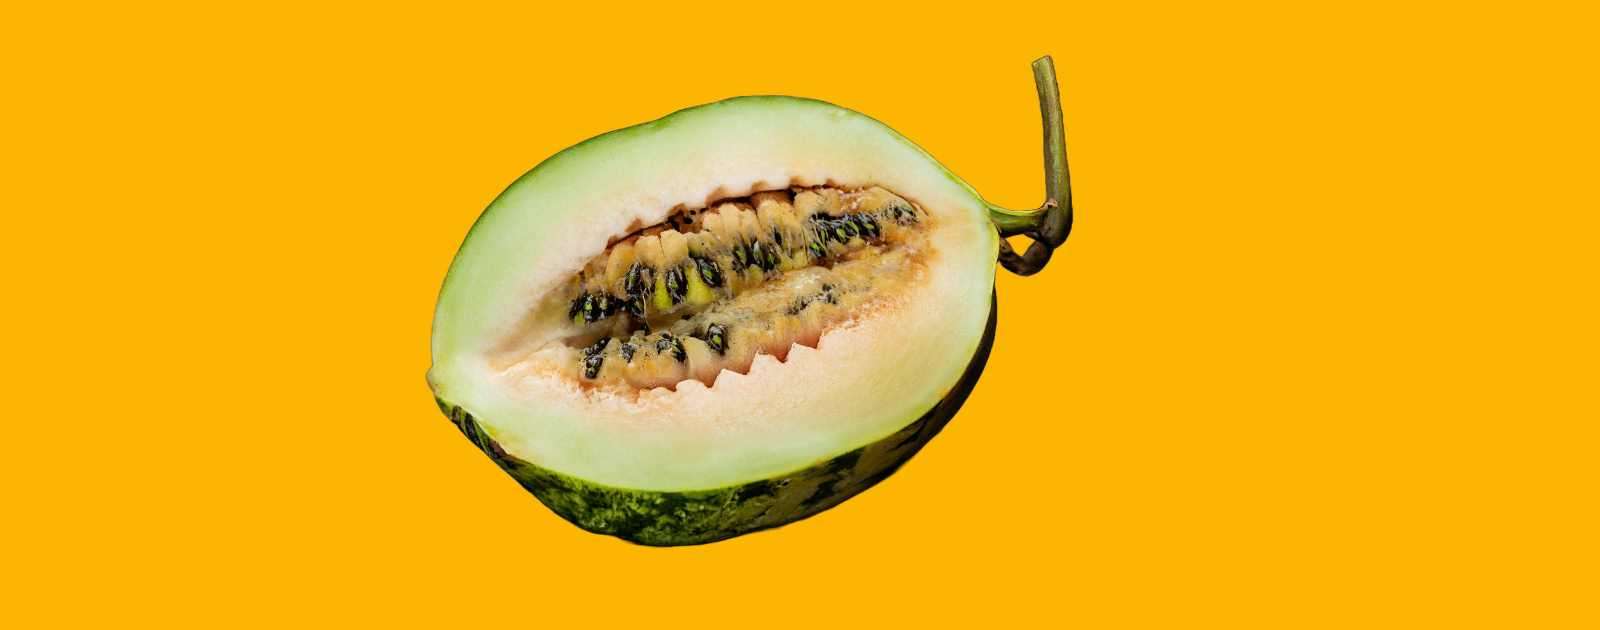 Is Cocomelon a Melon or a Fruit?